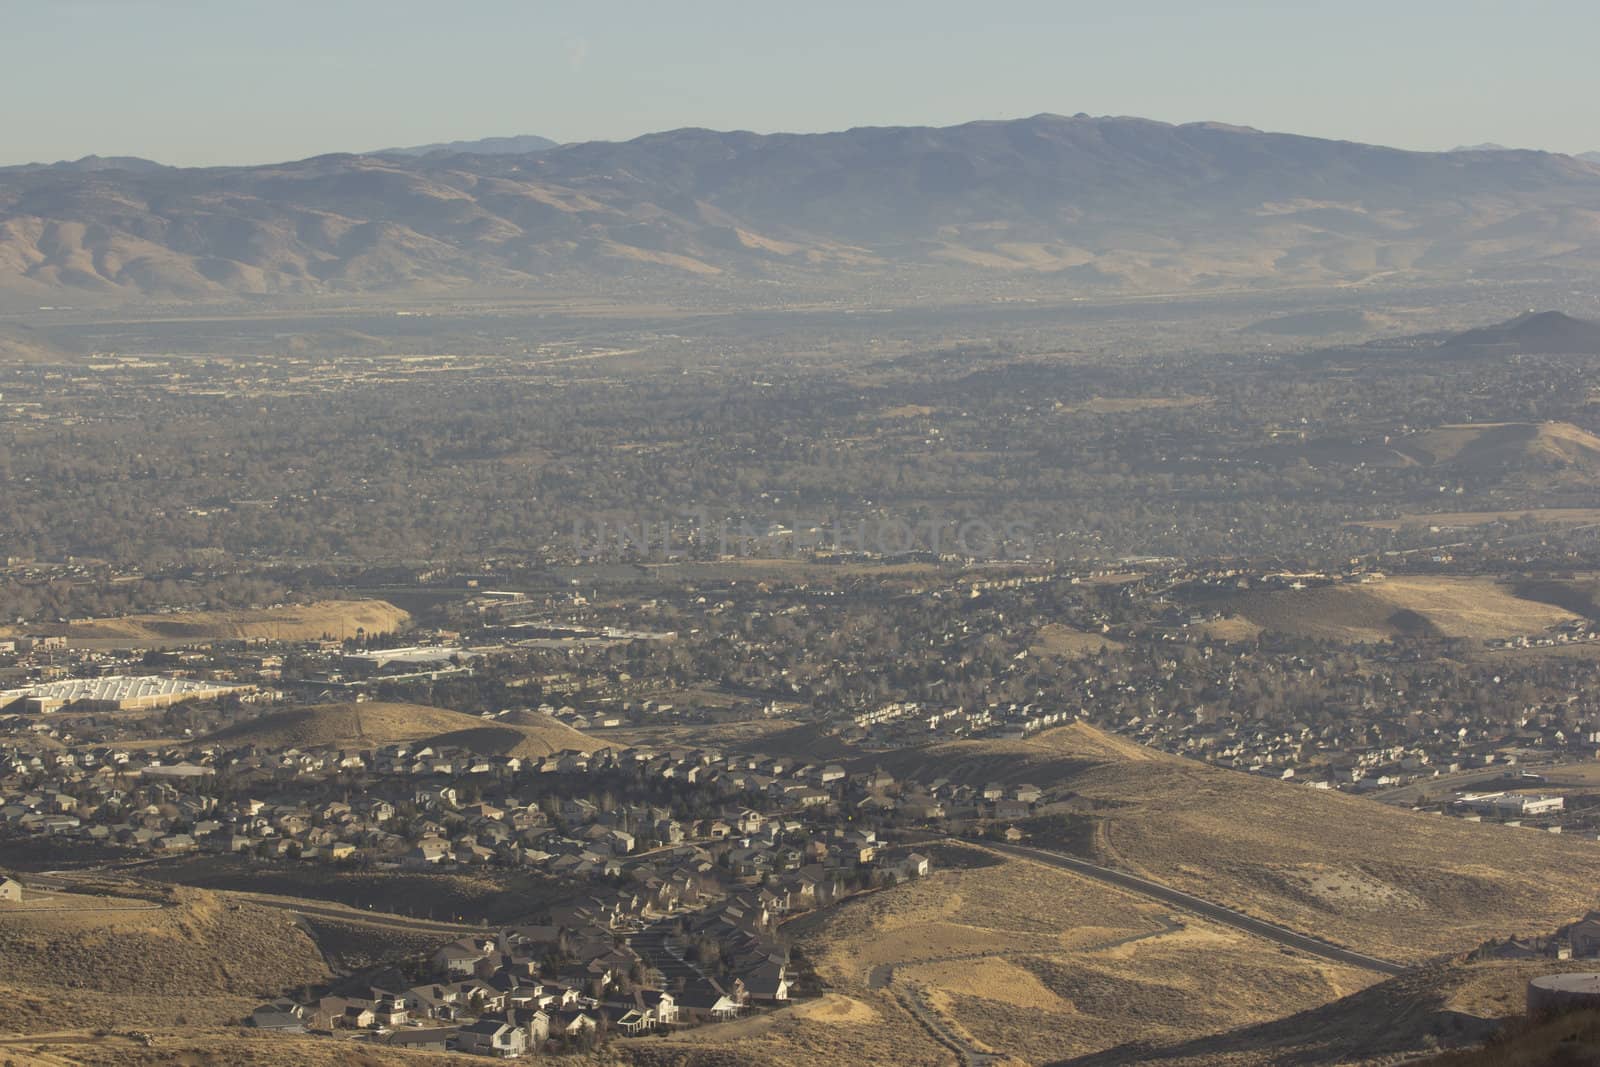 shots of reno from a high angle. slight haze in teh atmosphere.